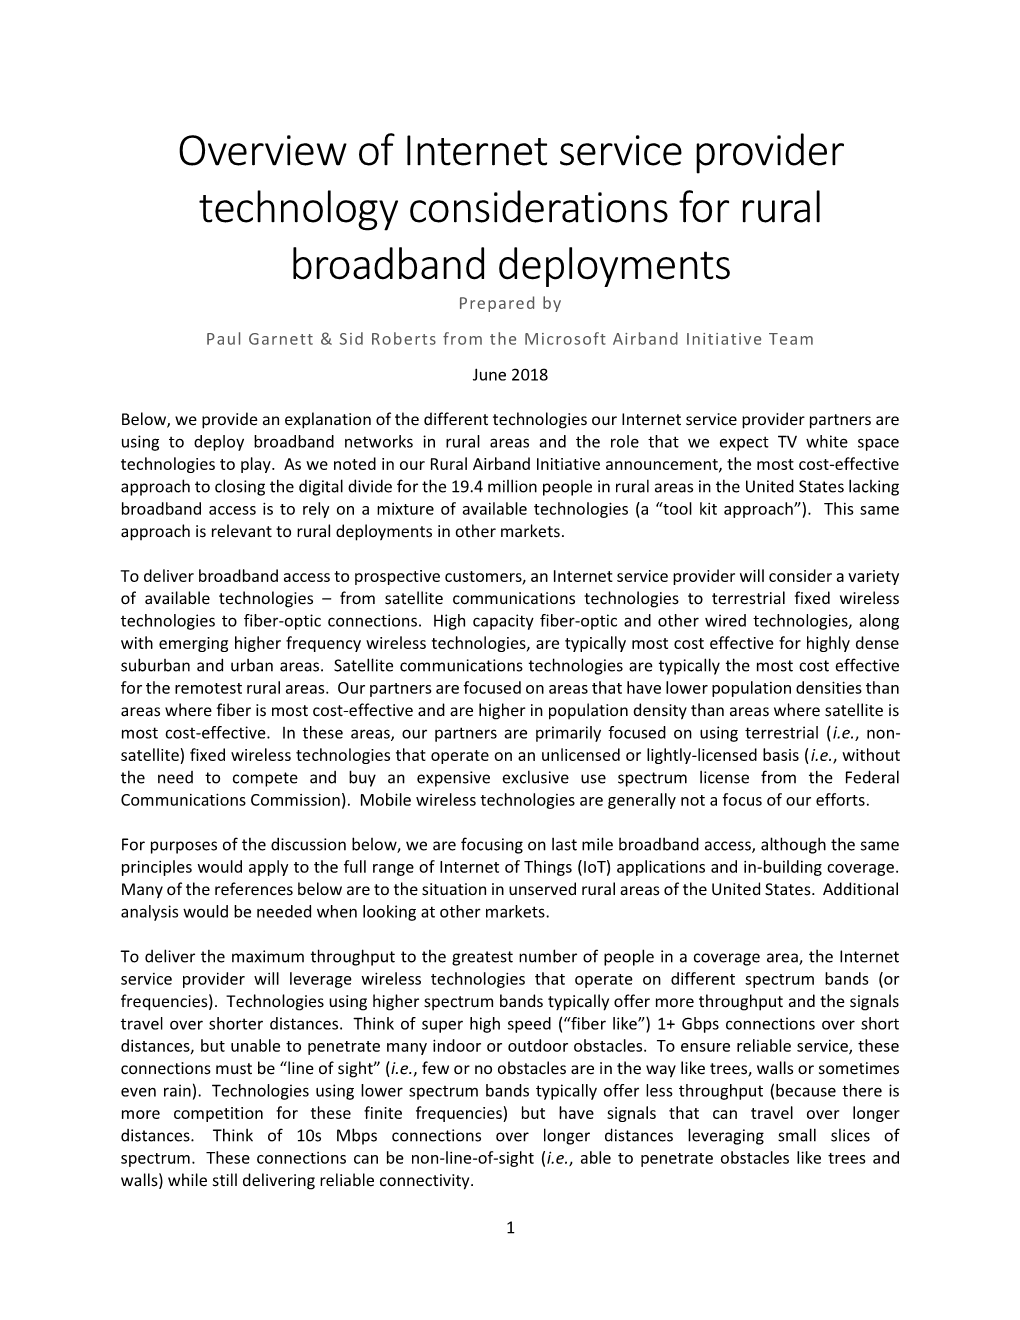 Overview of Internet Service Provider Technology Considerations for Rural